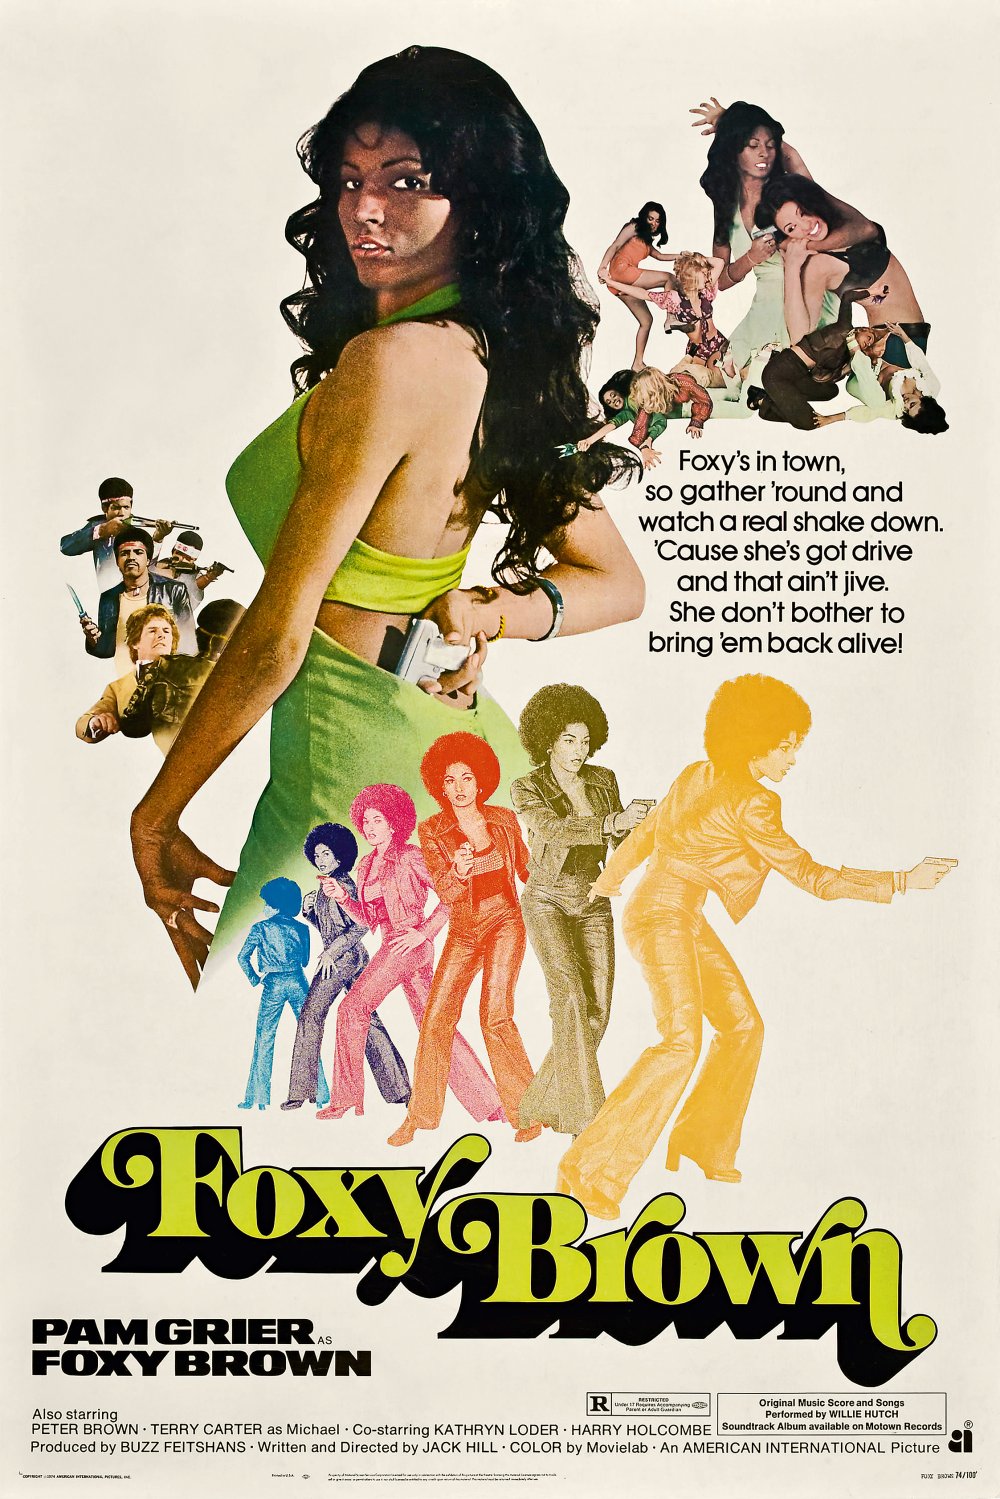 The design for the 1974 film Foxy Brown featured a host of faces and figures, as did many American blaxploitation movie posters.